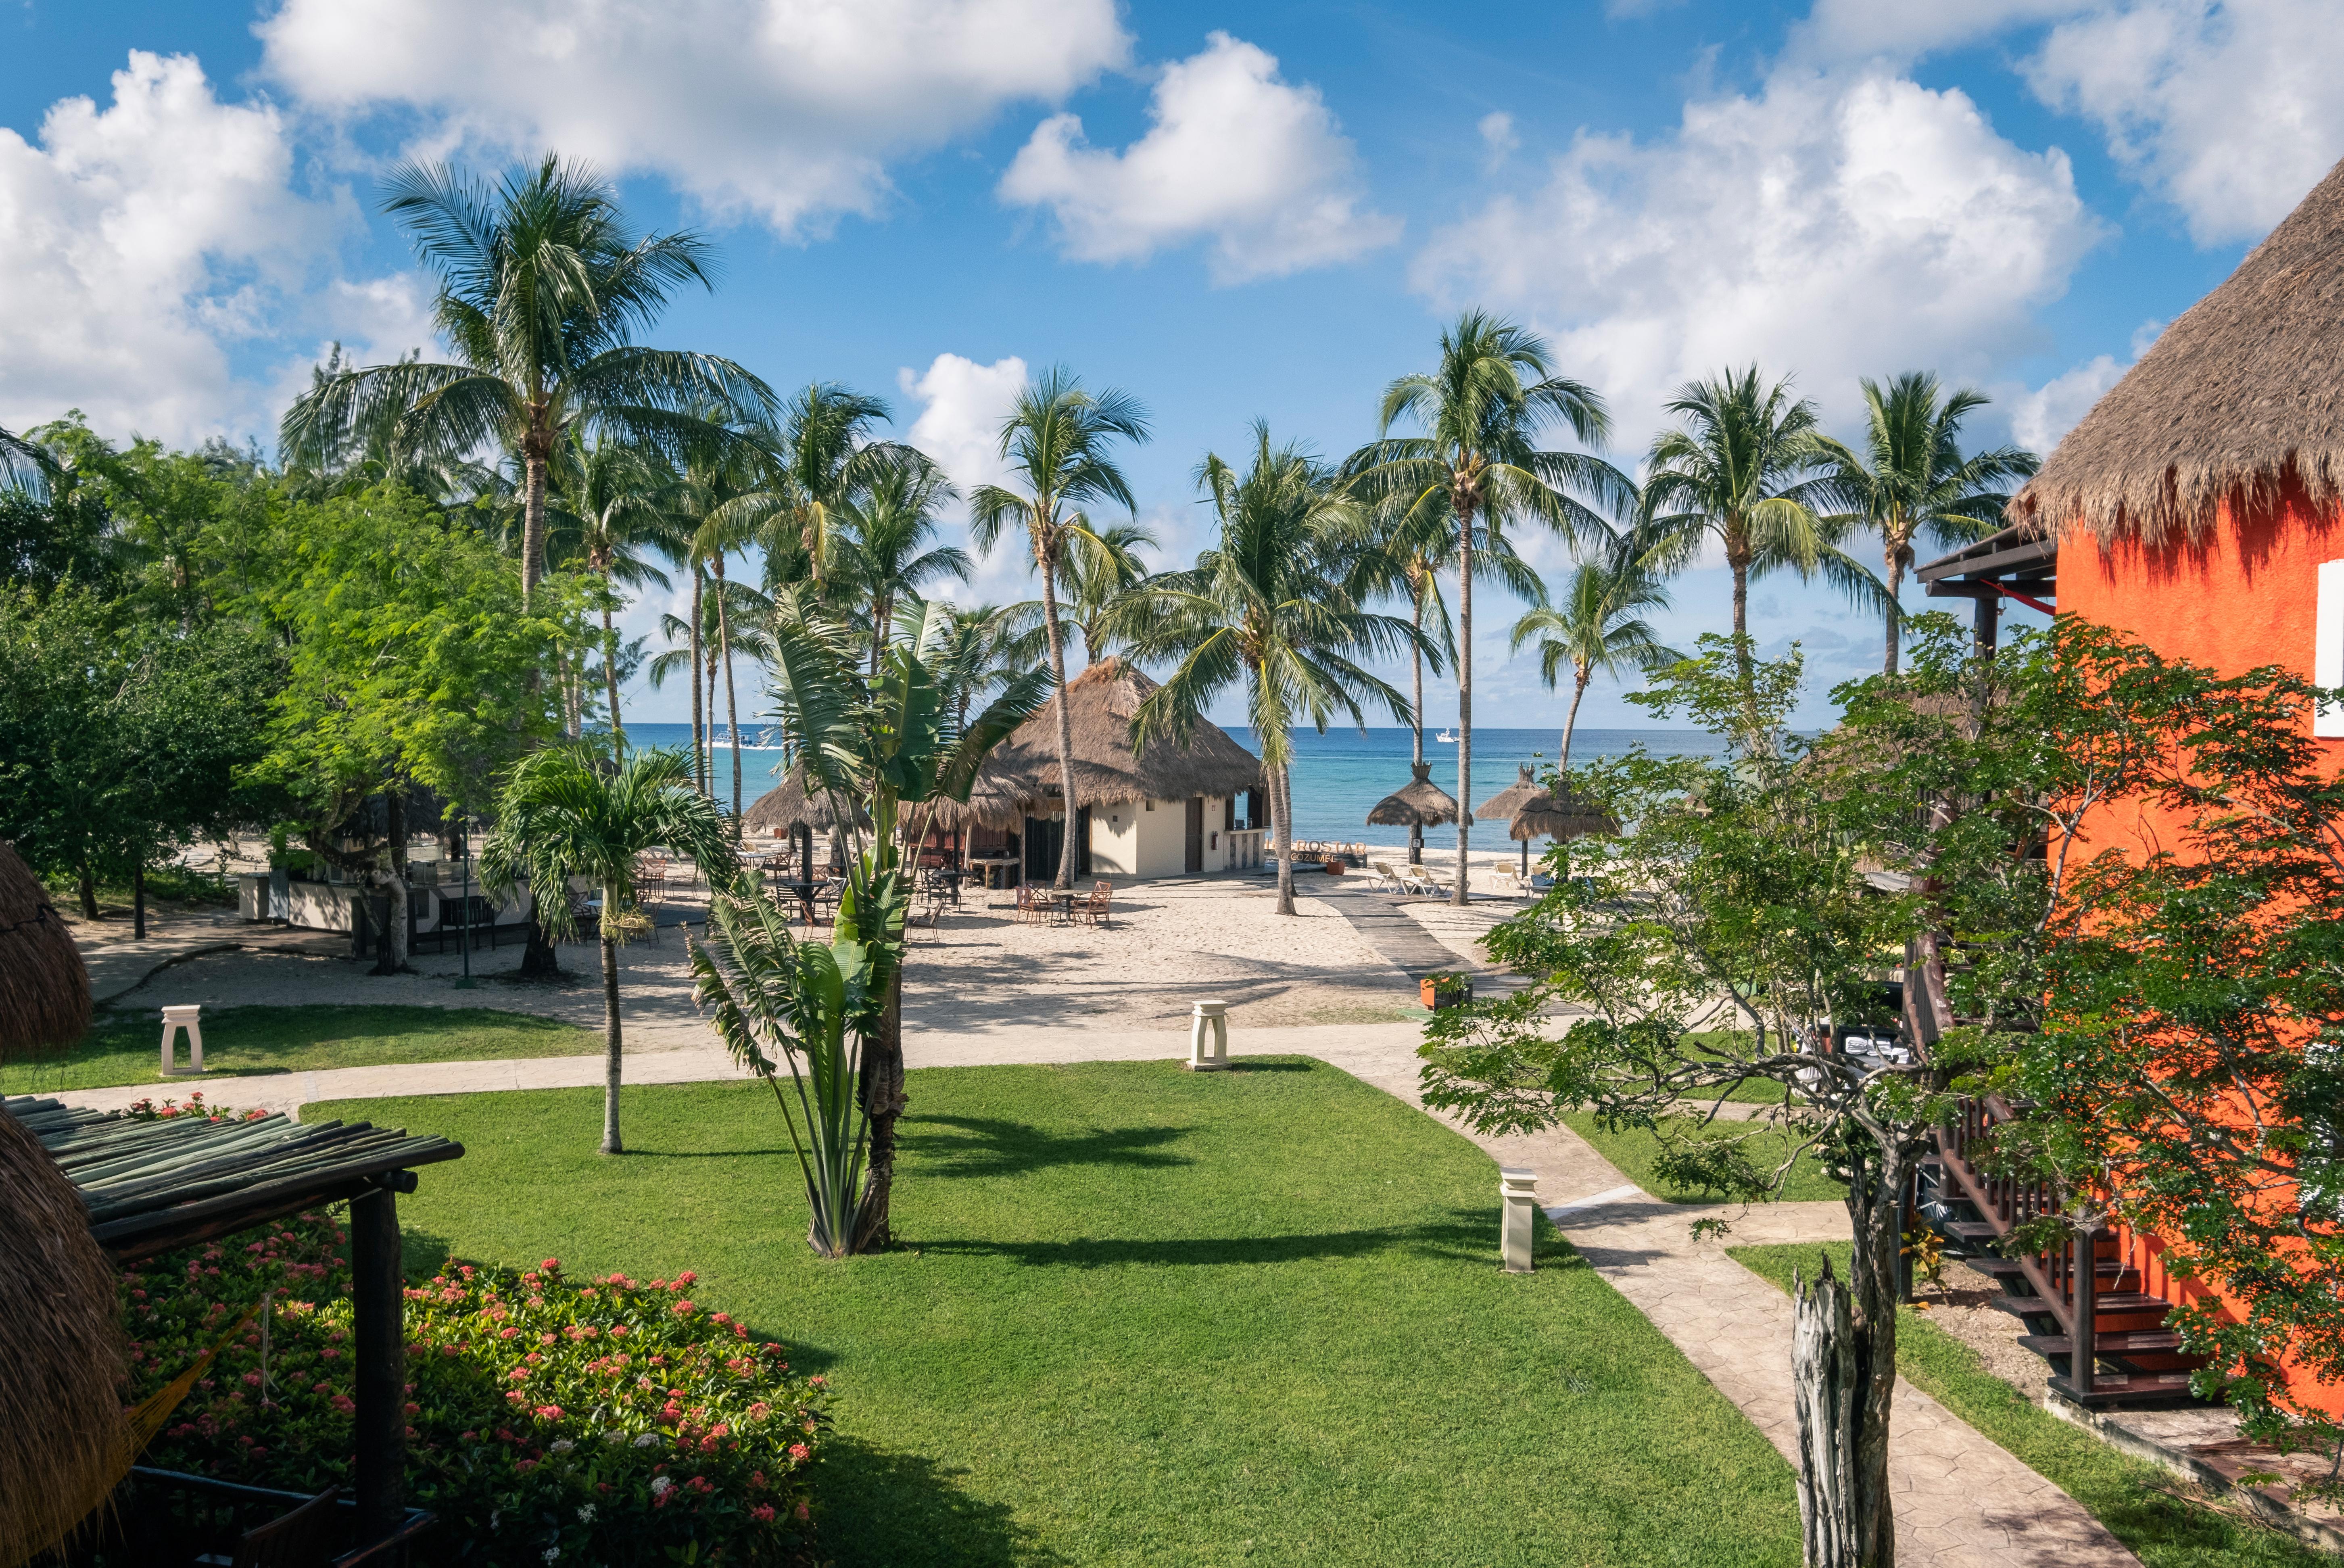 HOTEL IBEROSTAR COZUMEL 5* (Mexico) - from US$ 259 | BOOKED